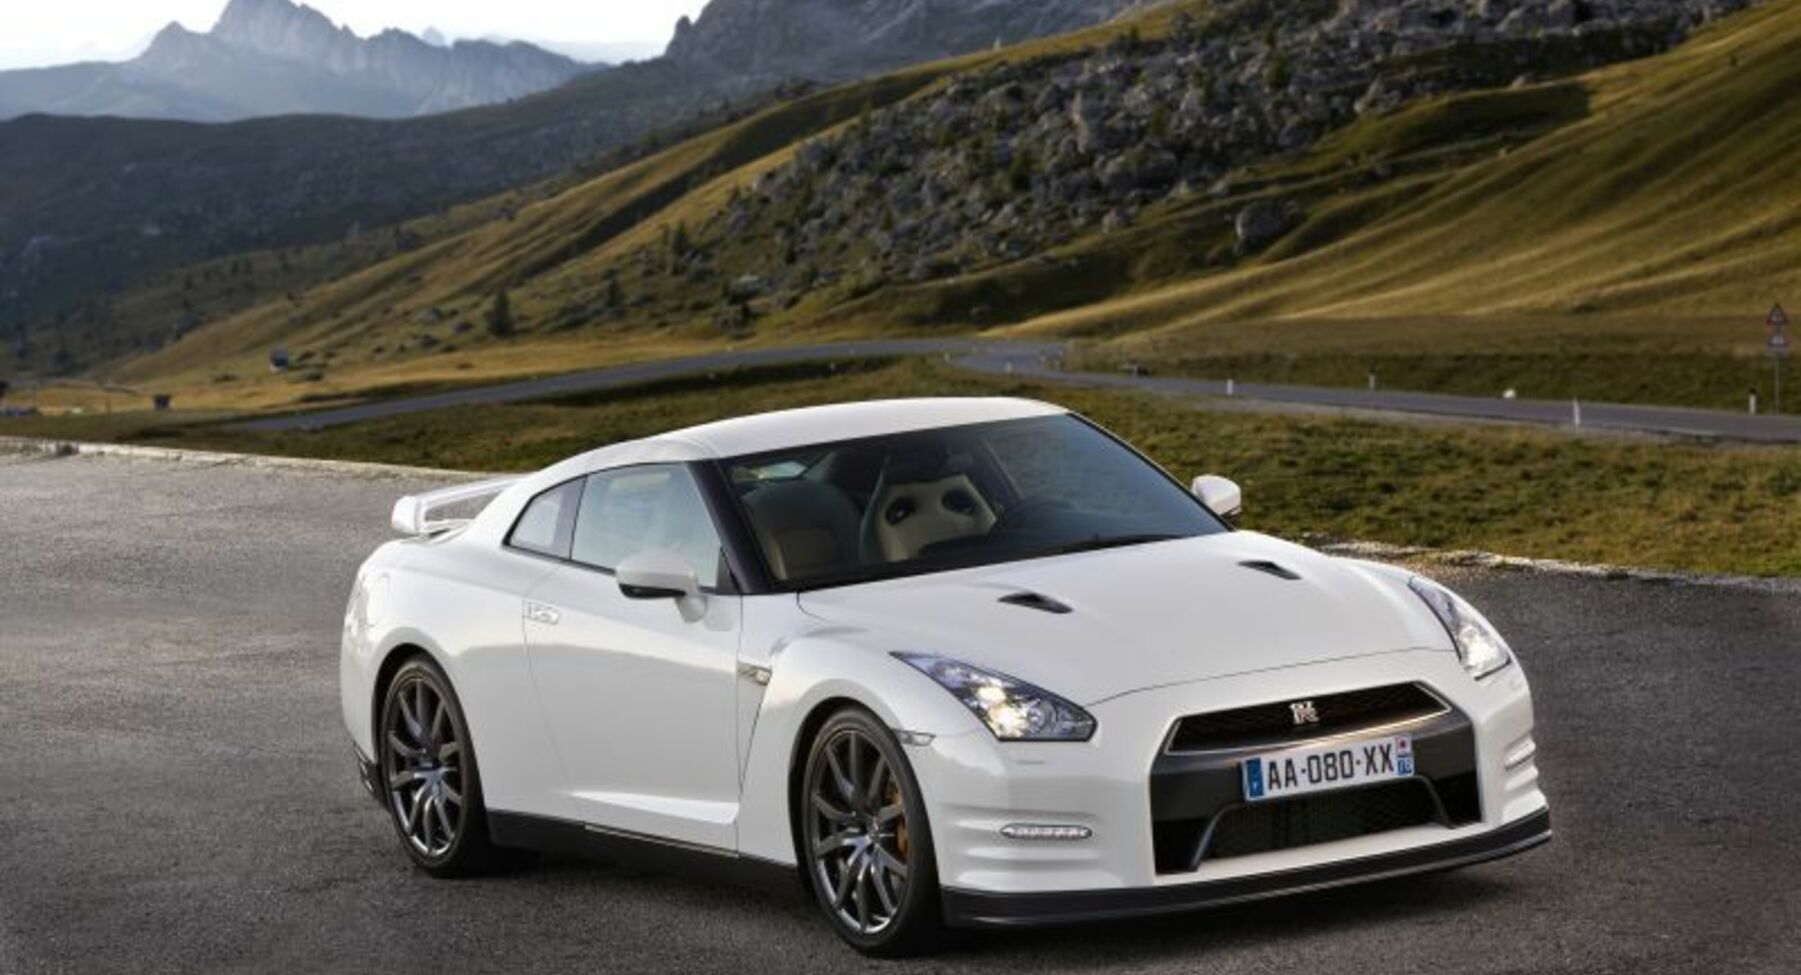 Nissan GT-R (facelift 2011) 3.8 V6 (550 Hp) 4WD Automatic 2012, 2013, 2014, 2015, 2016 